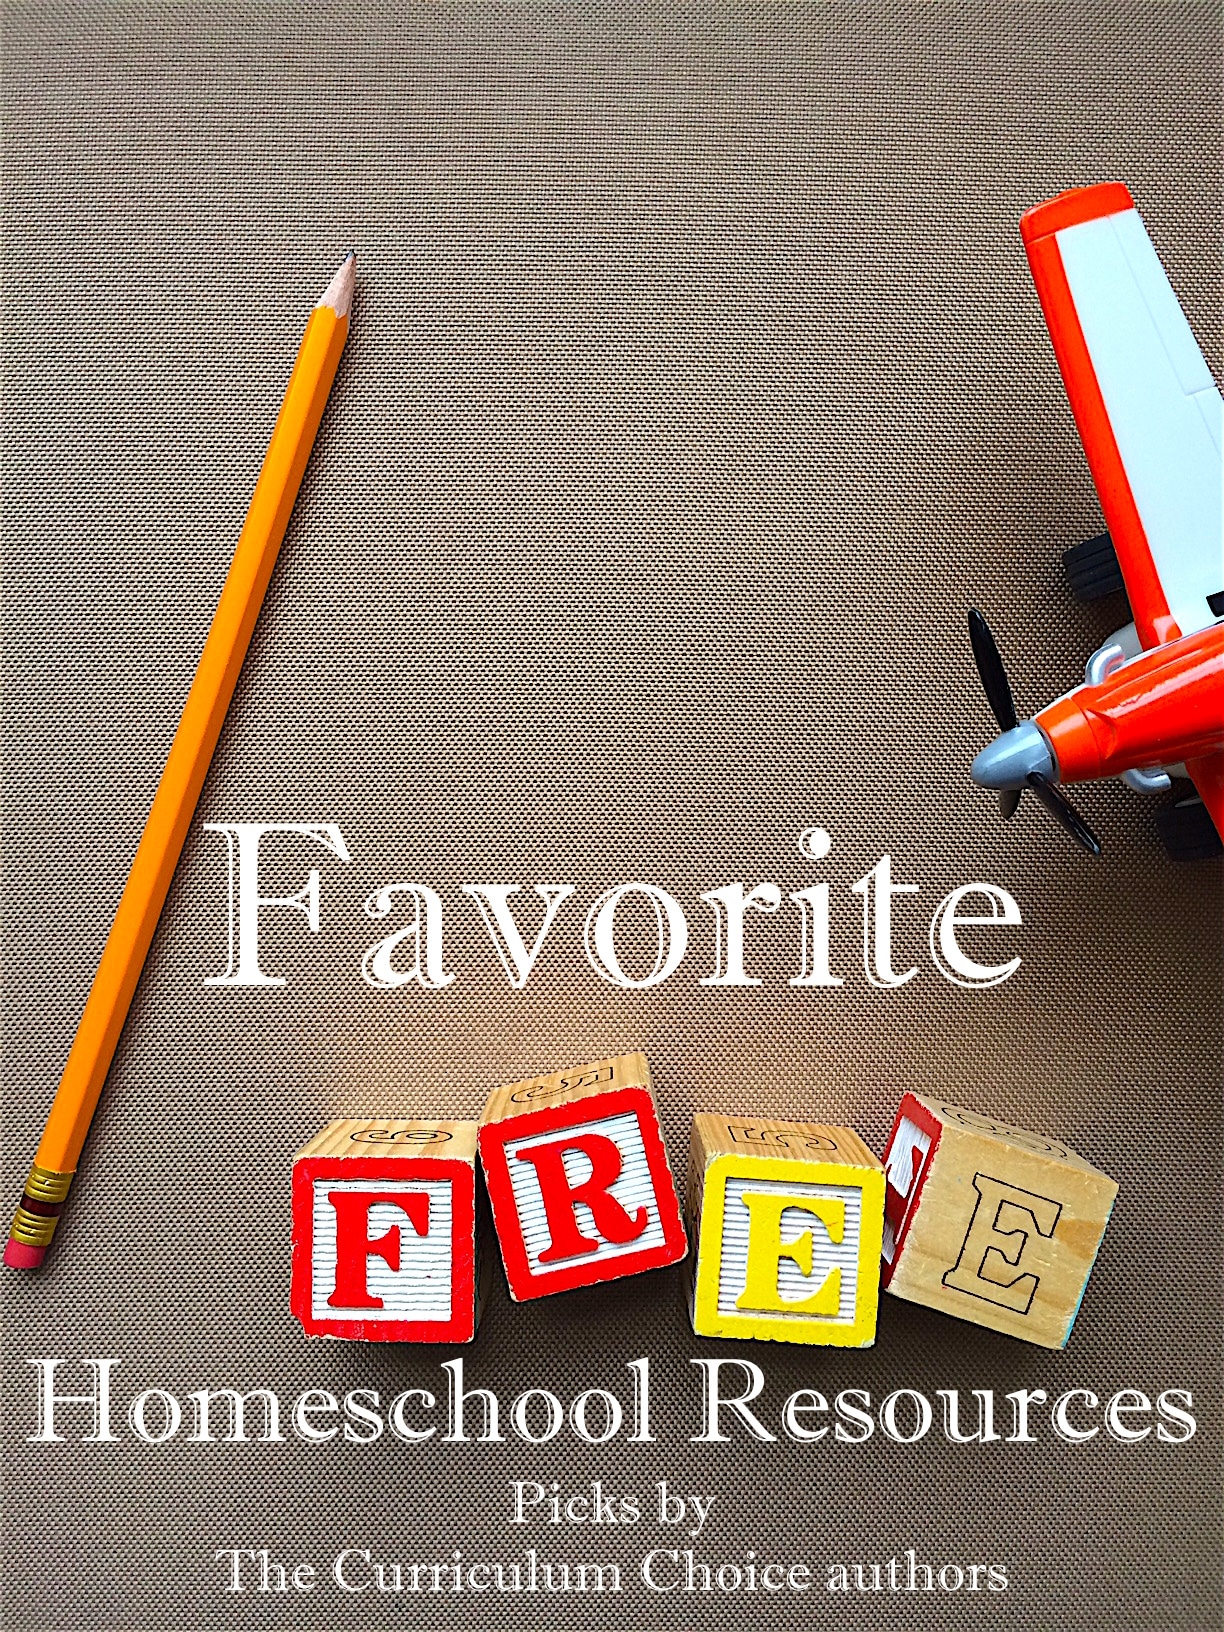 Our Favorite Free Homeschool Resources